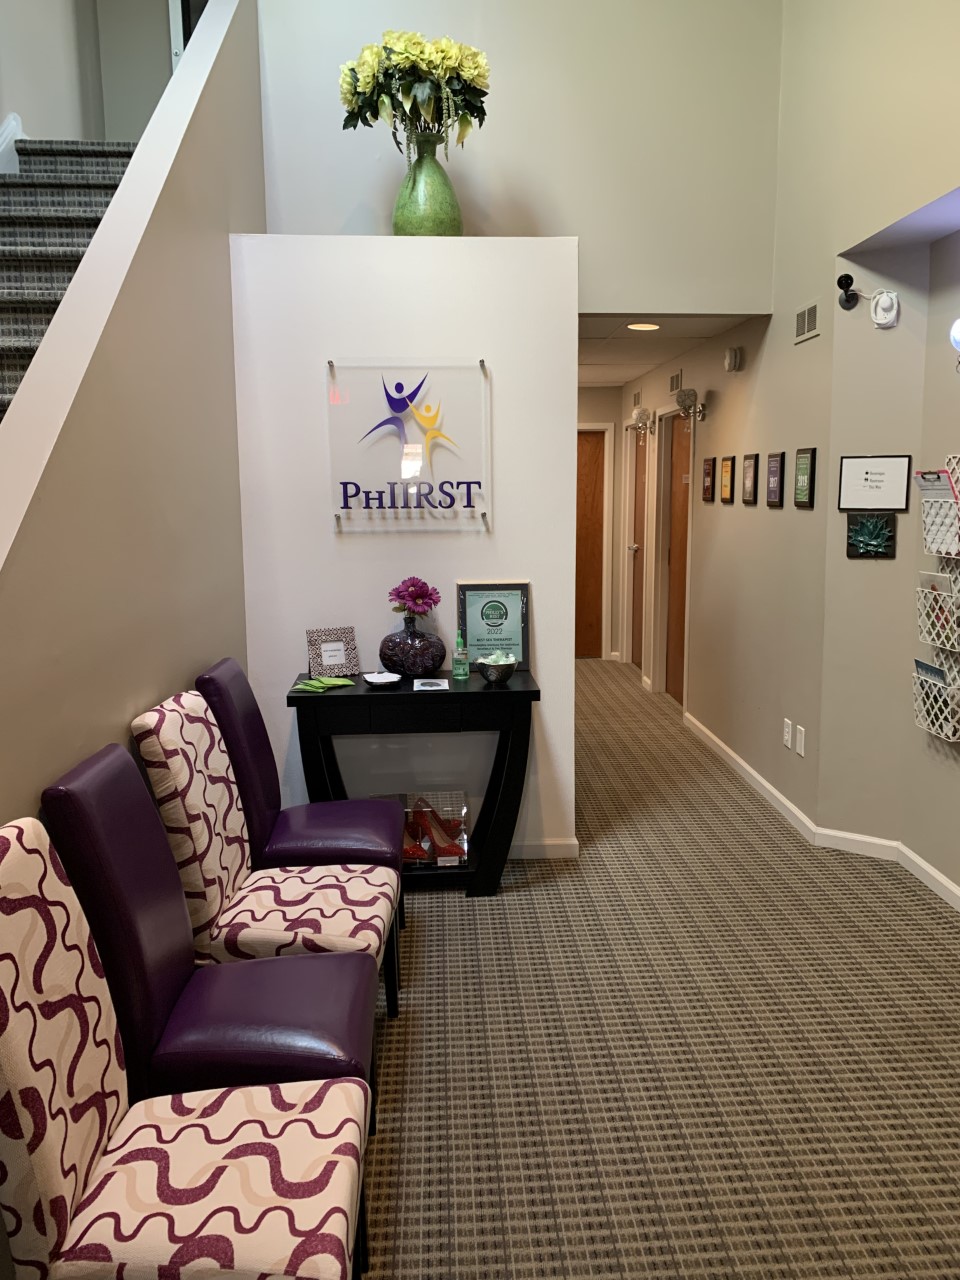 Phiirst - Media PA Office